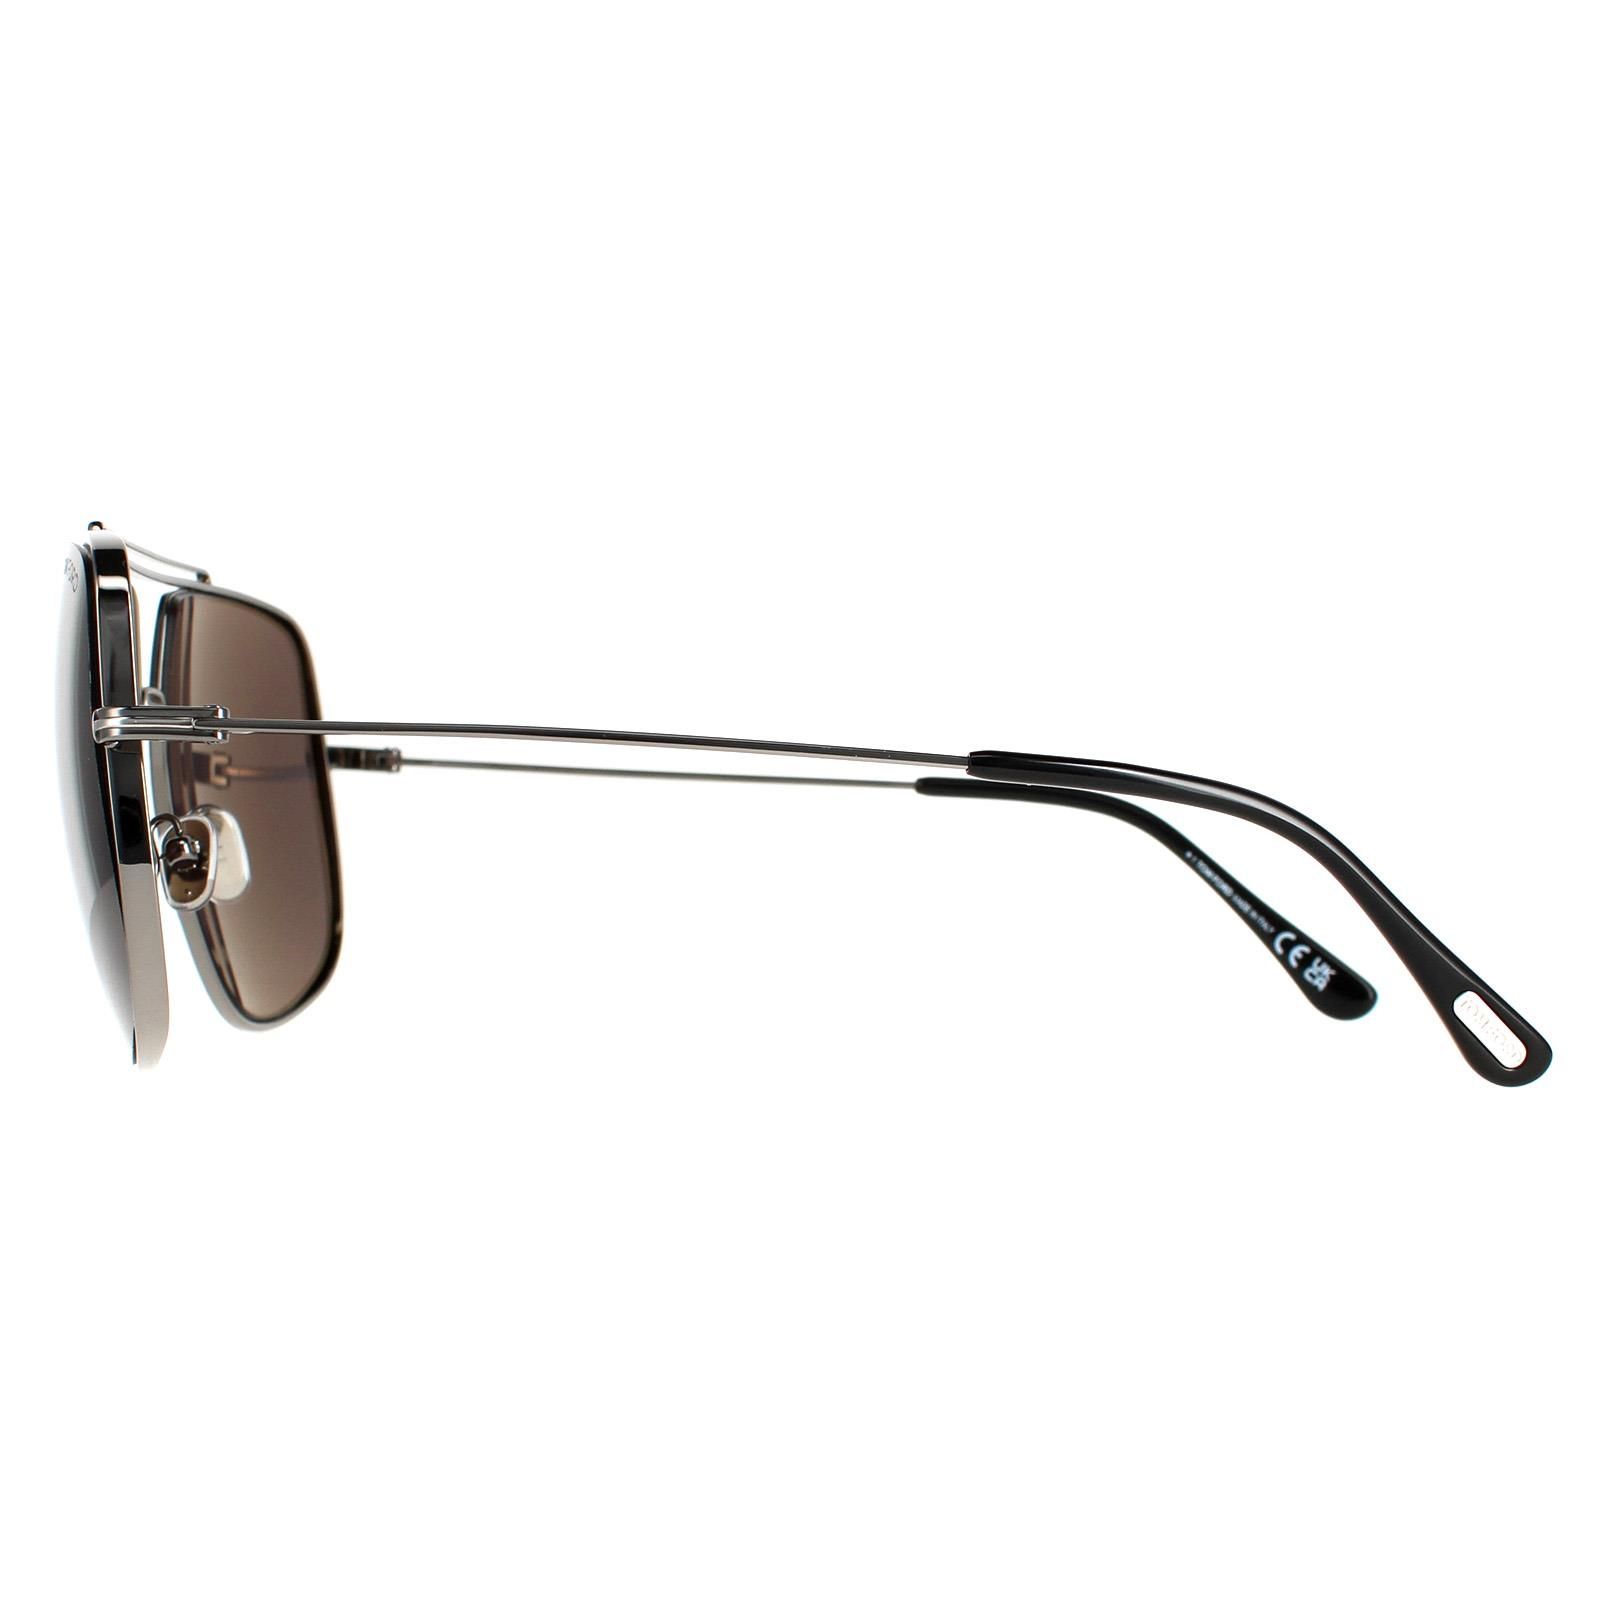 Tom Ford Aviator Mens Ruthenium Grey FT0927 Liam Sunglasses are an oversized square aviator design crafted from lightweight metal and feature a distinctive double brow bar and thin metal temples subtly displaying the Tom Ford T logo.